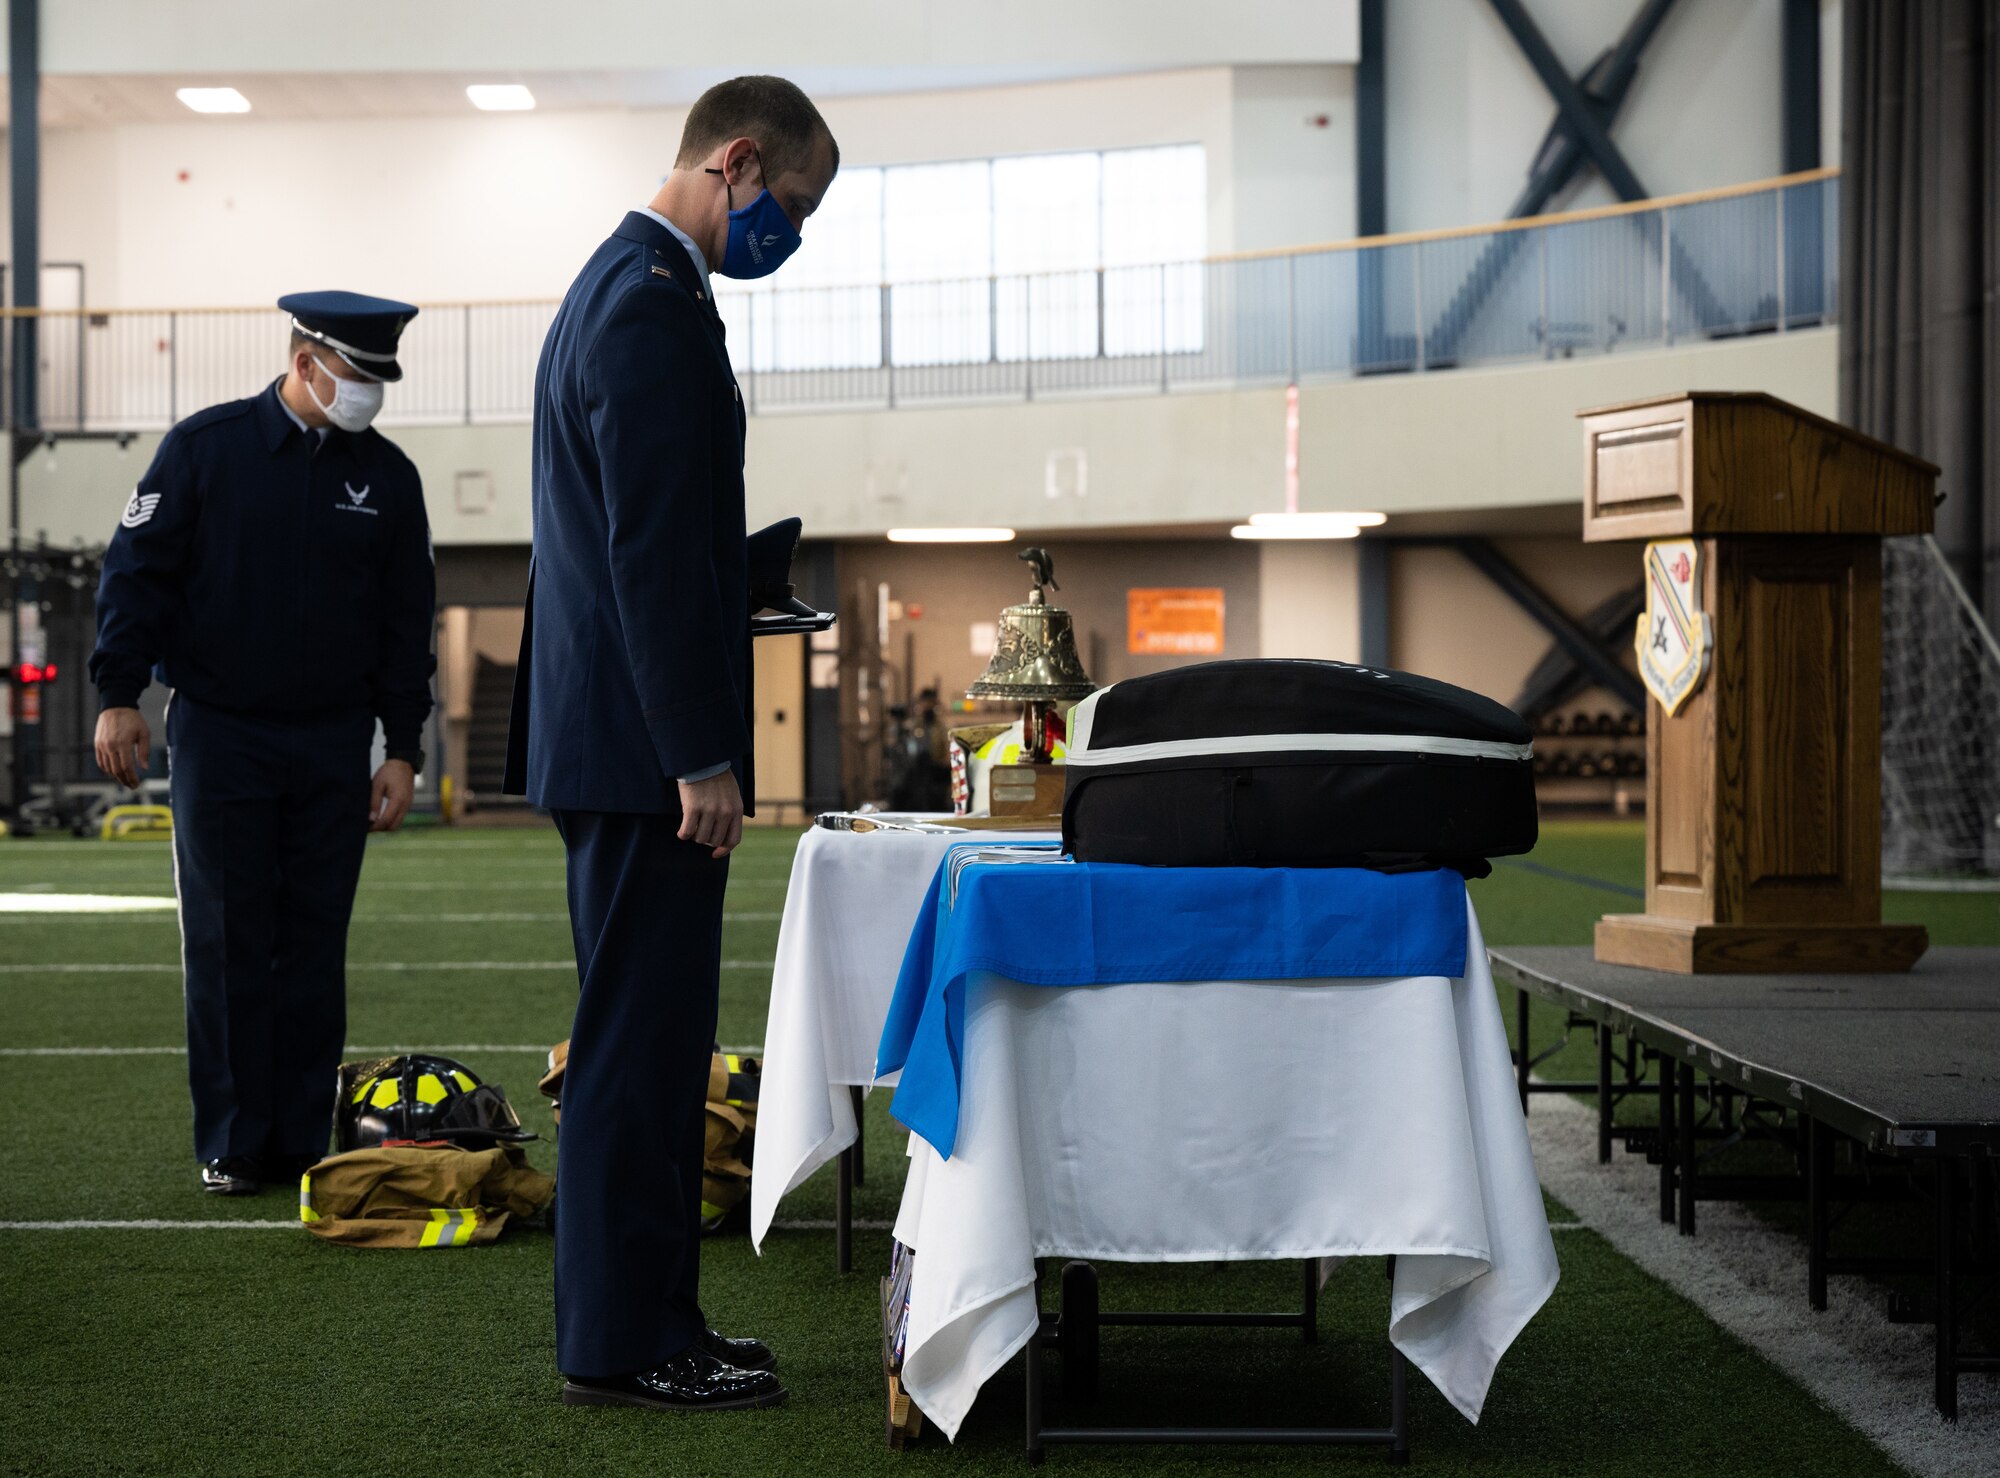 U.S. Air Force Airmen from the 354th Fighter Wing look at 9/11 memorabilia during a remembrance ceremony on Eielson Air Force Base, Alaska, Sept. 11, 2021.